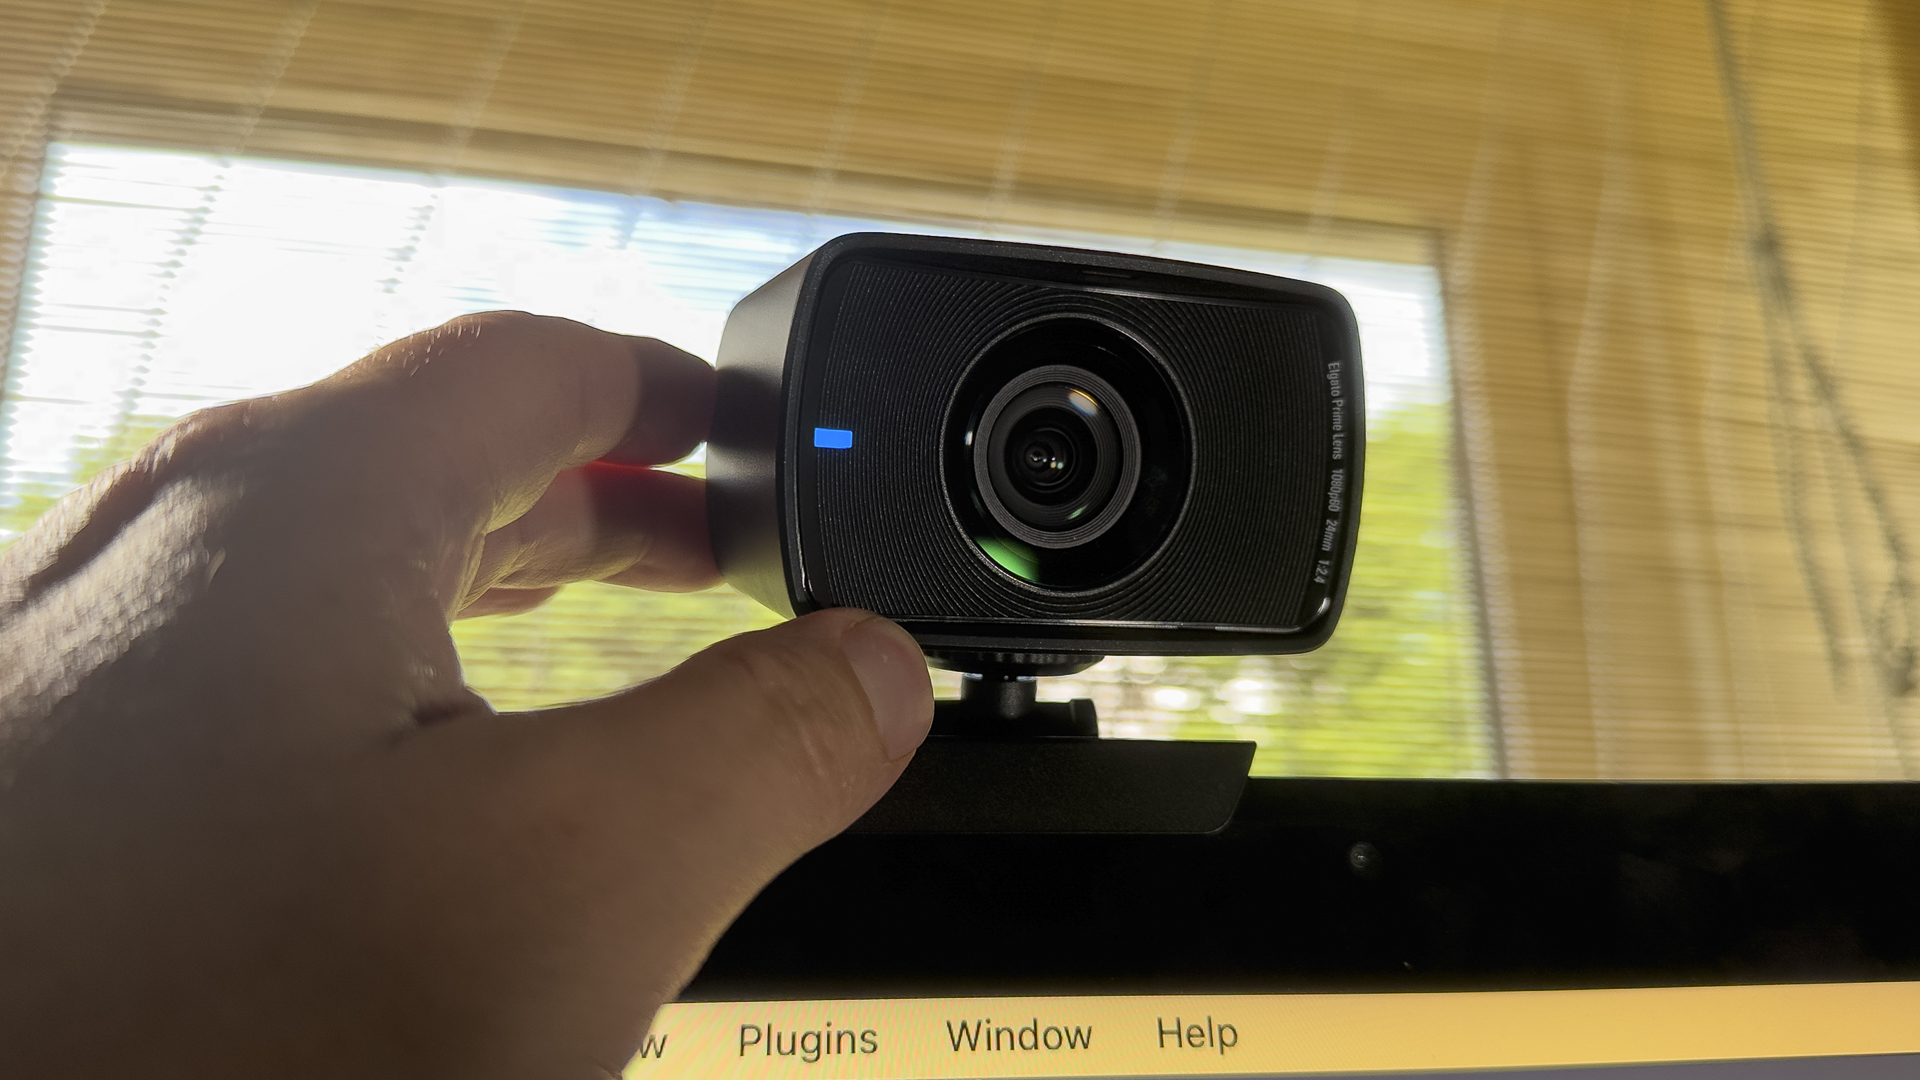 Elgao Facecam review image showing a human hand adjusting the camera.